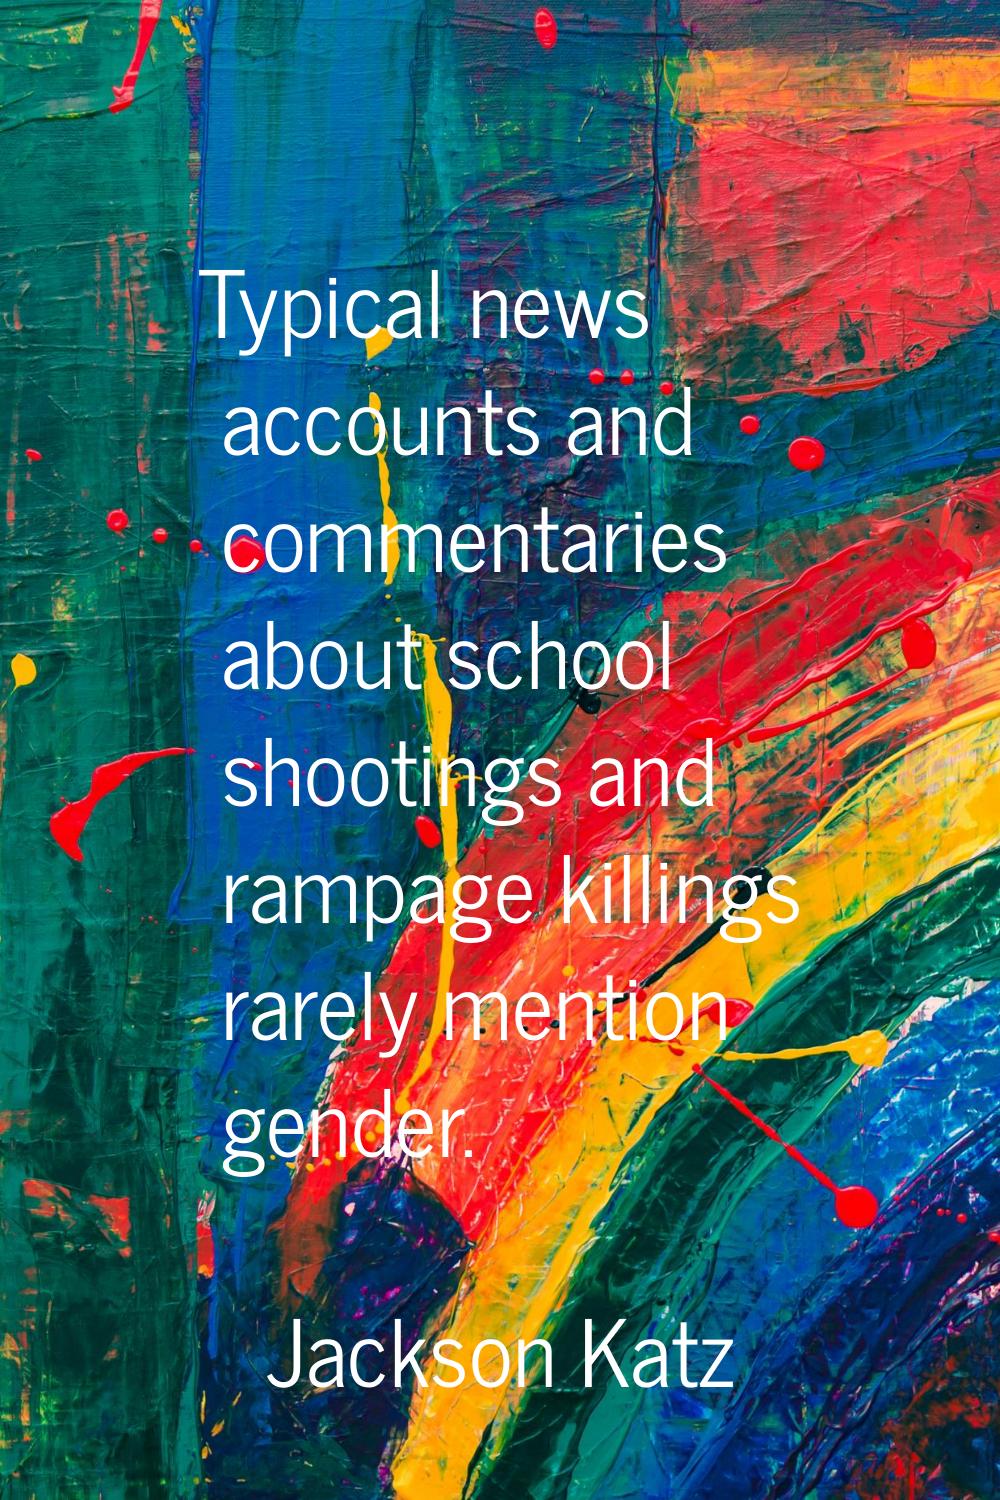 Typical news accounts and commentaries about school shootings and rampage killings rarely mention g